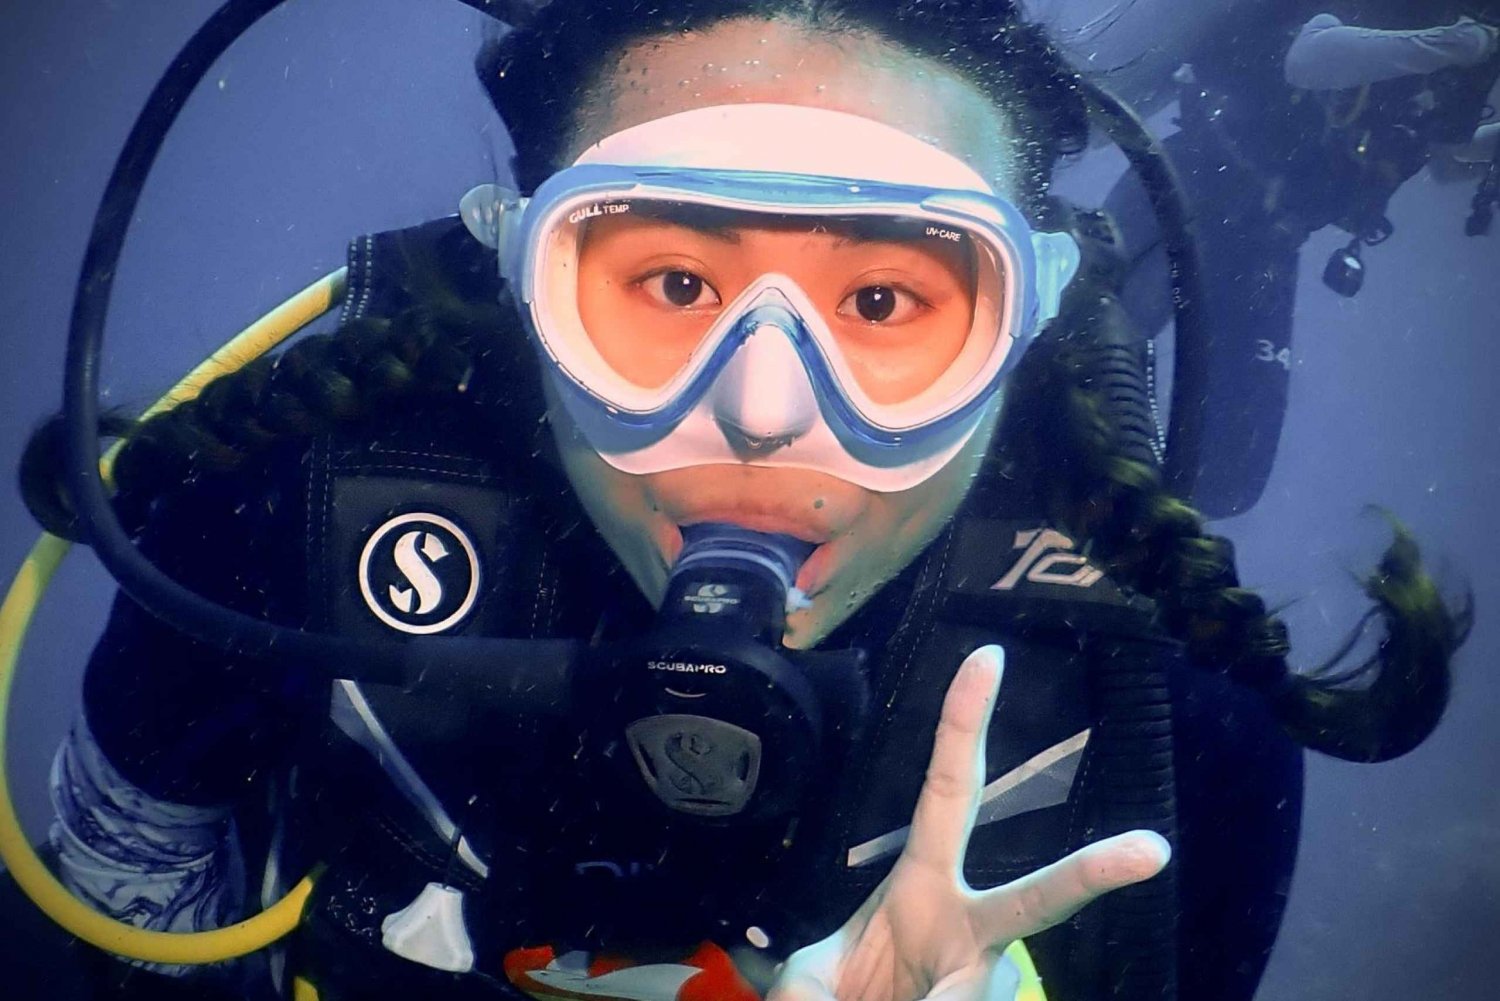 Phuket: Try SCUBA DIVING Full Day Experience 3 Dives